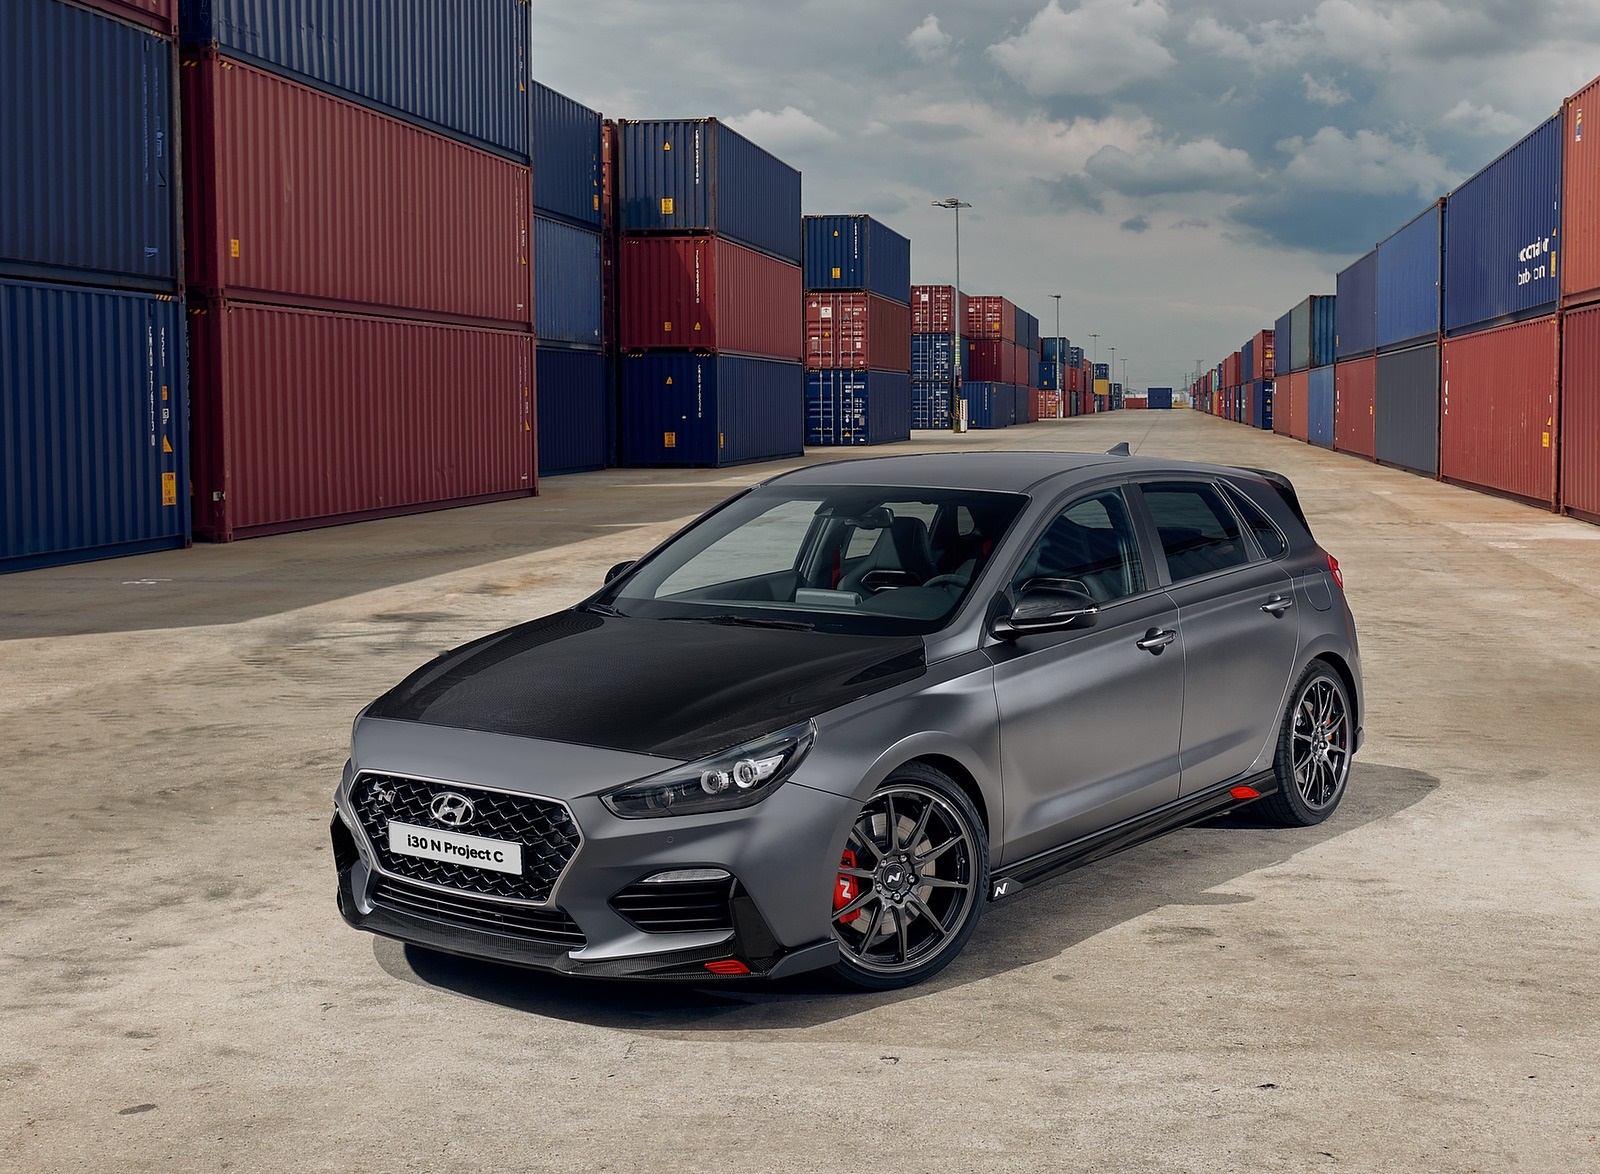 2020 Hyundai i30 N Project C Front Three-Quarter Wallpapers (11 ...